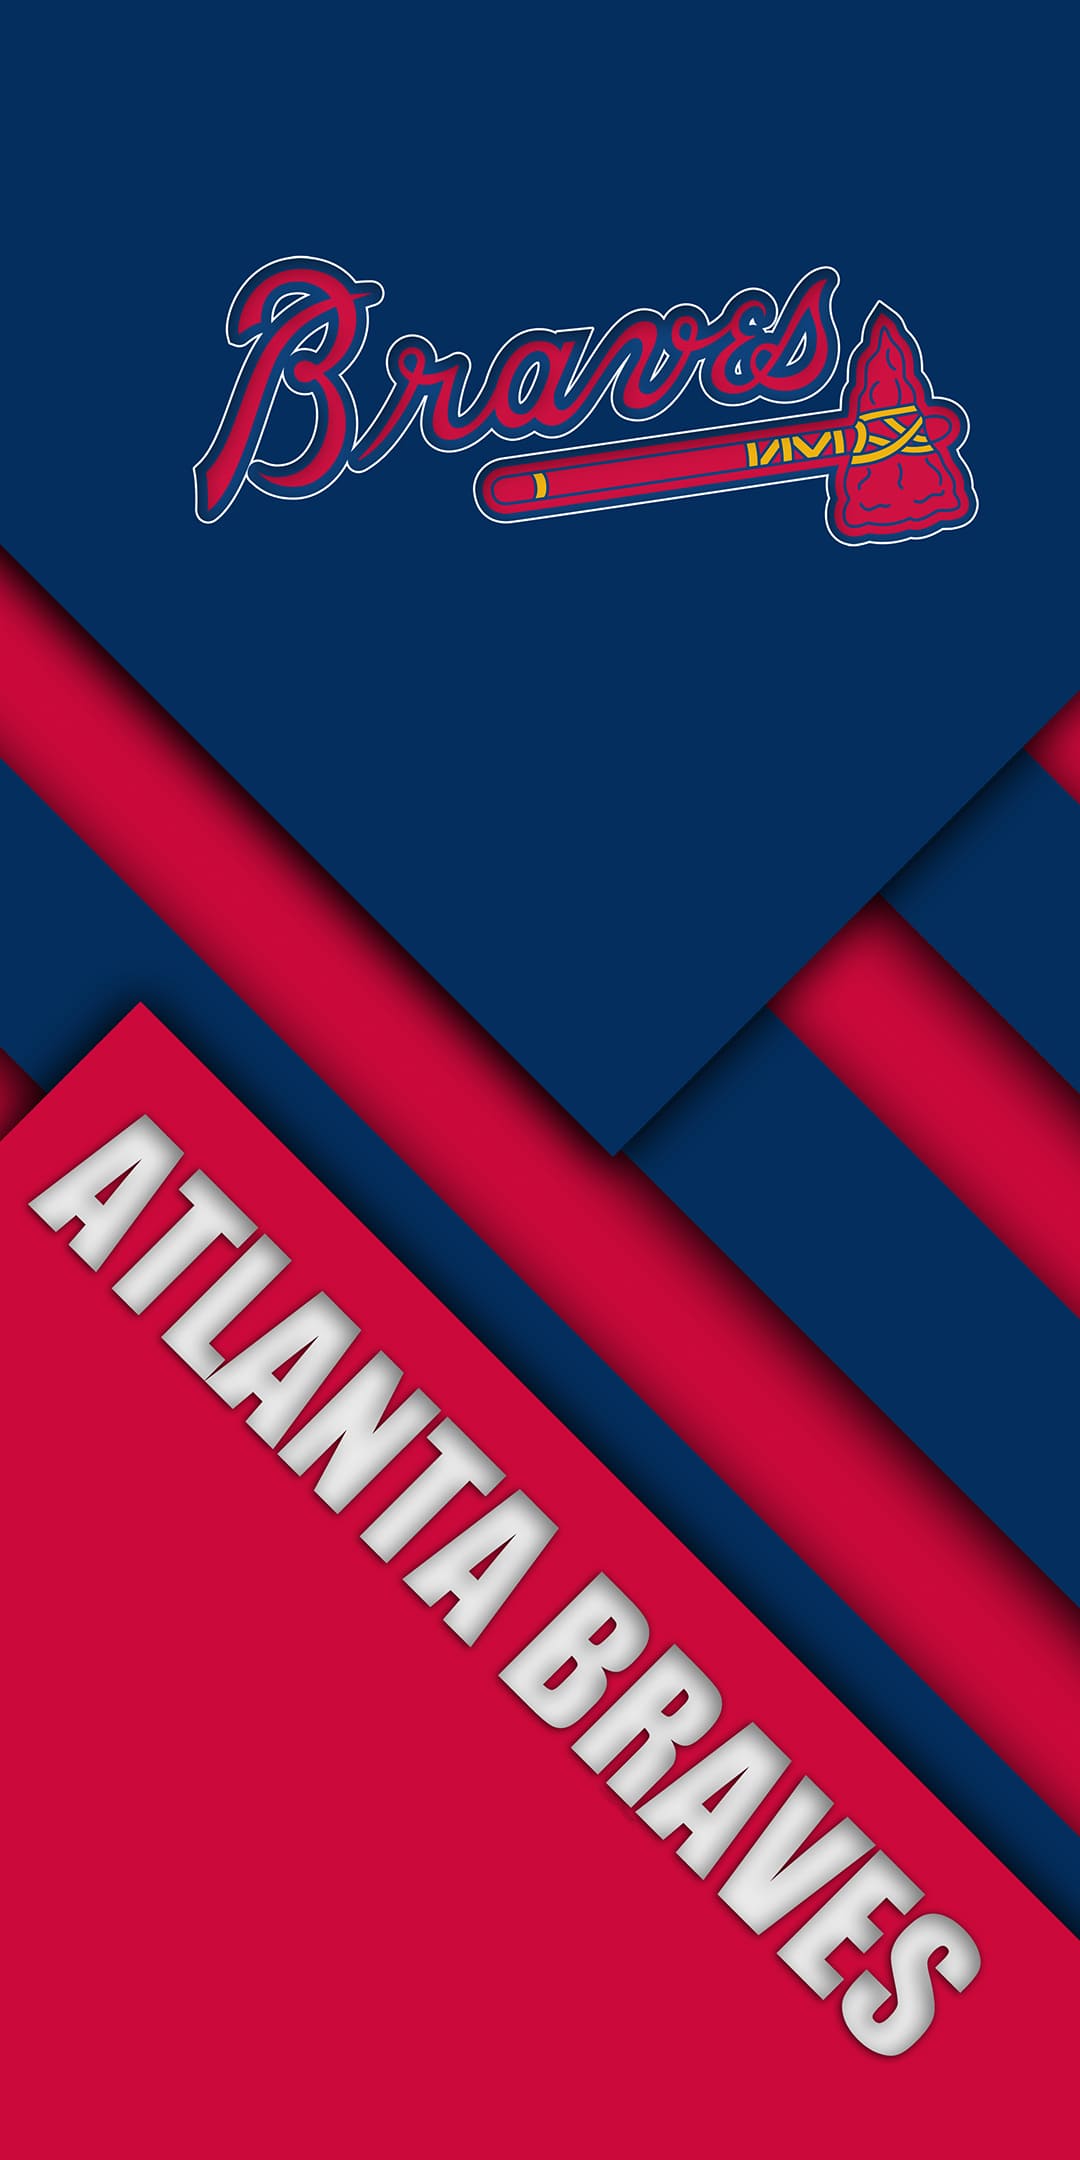 An Archive of Braves wallpapers gifs and graphics that Ive made over the  past few years  rBraves